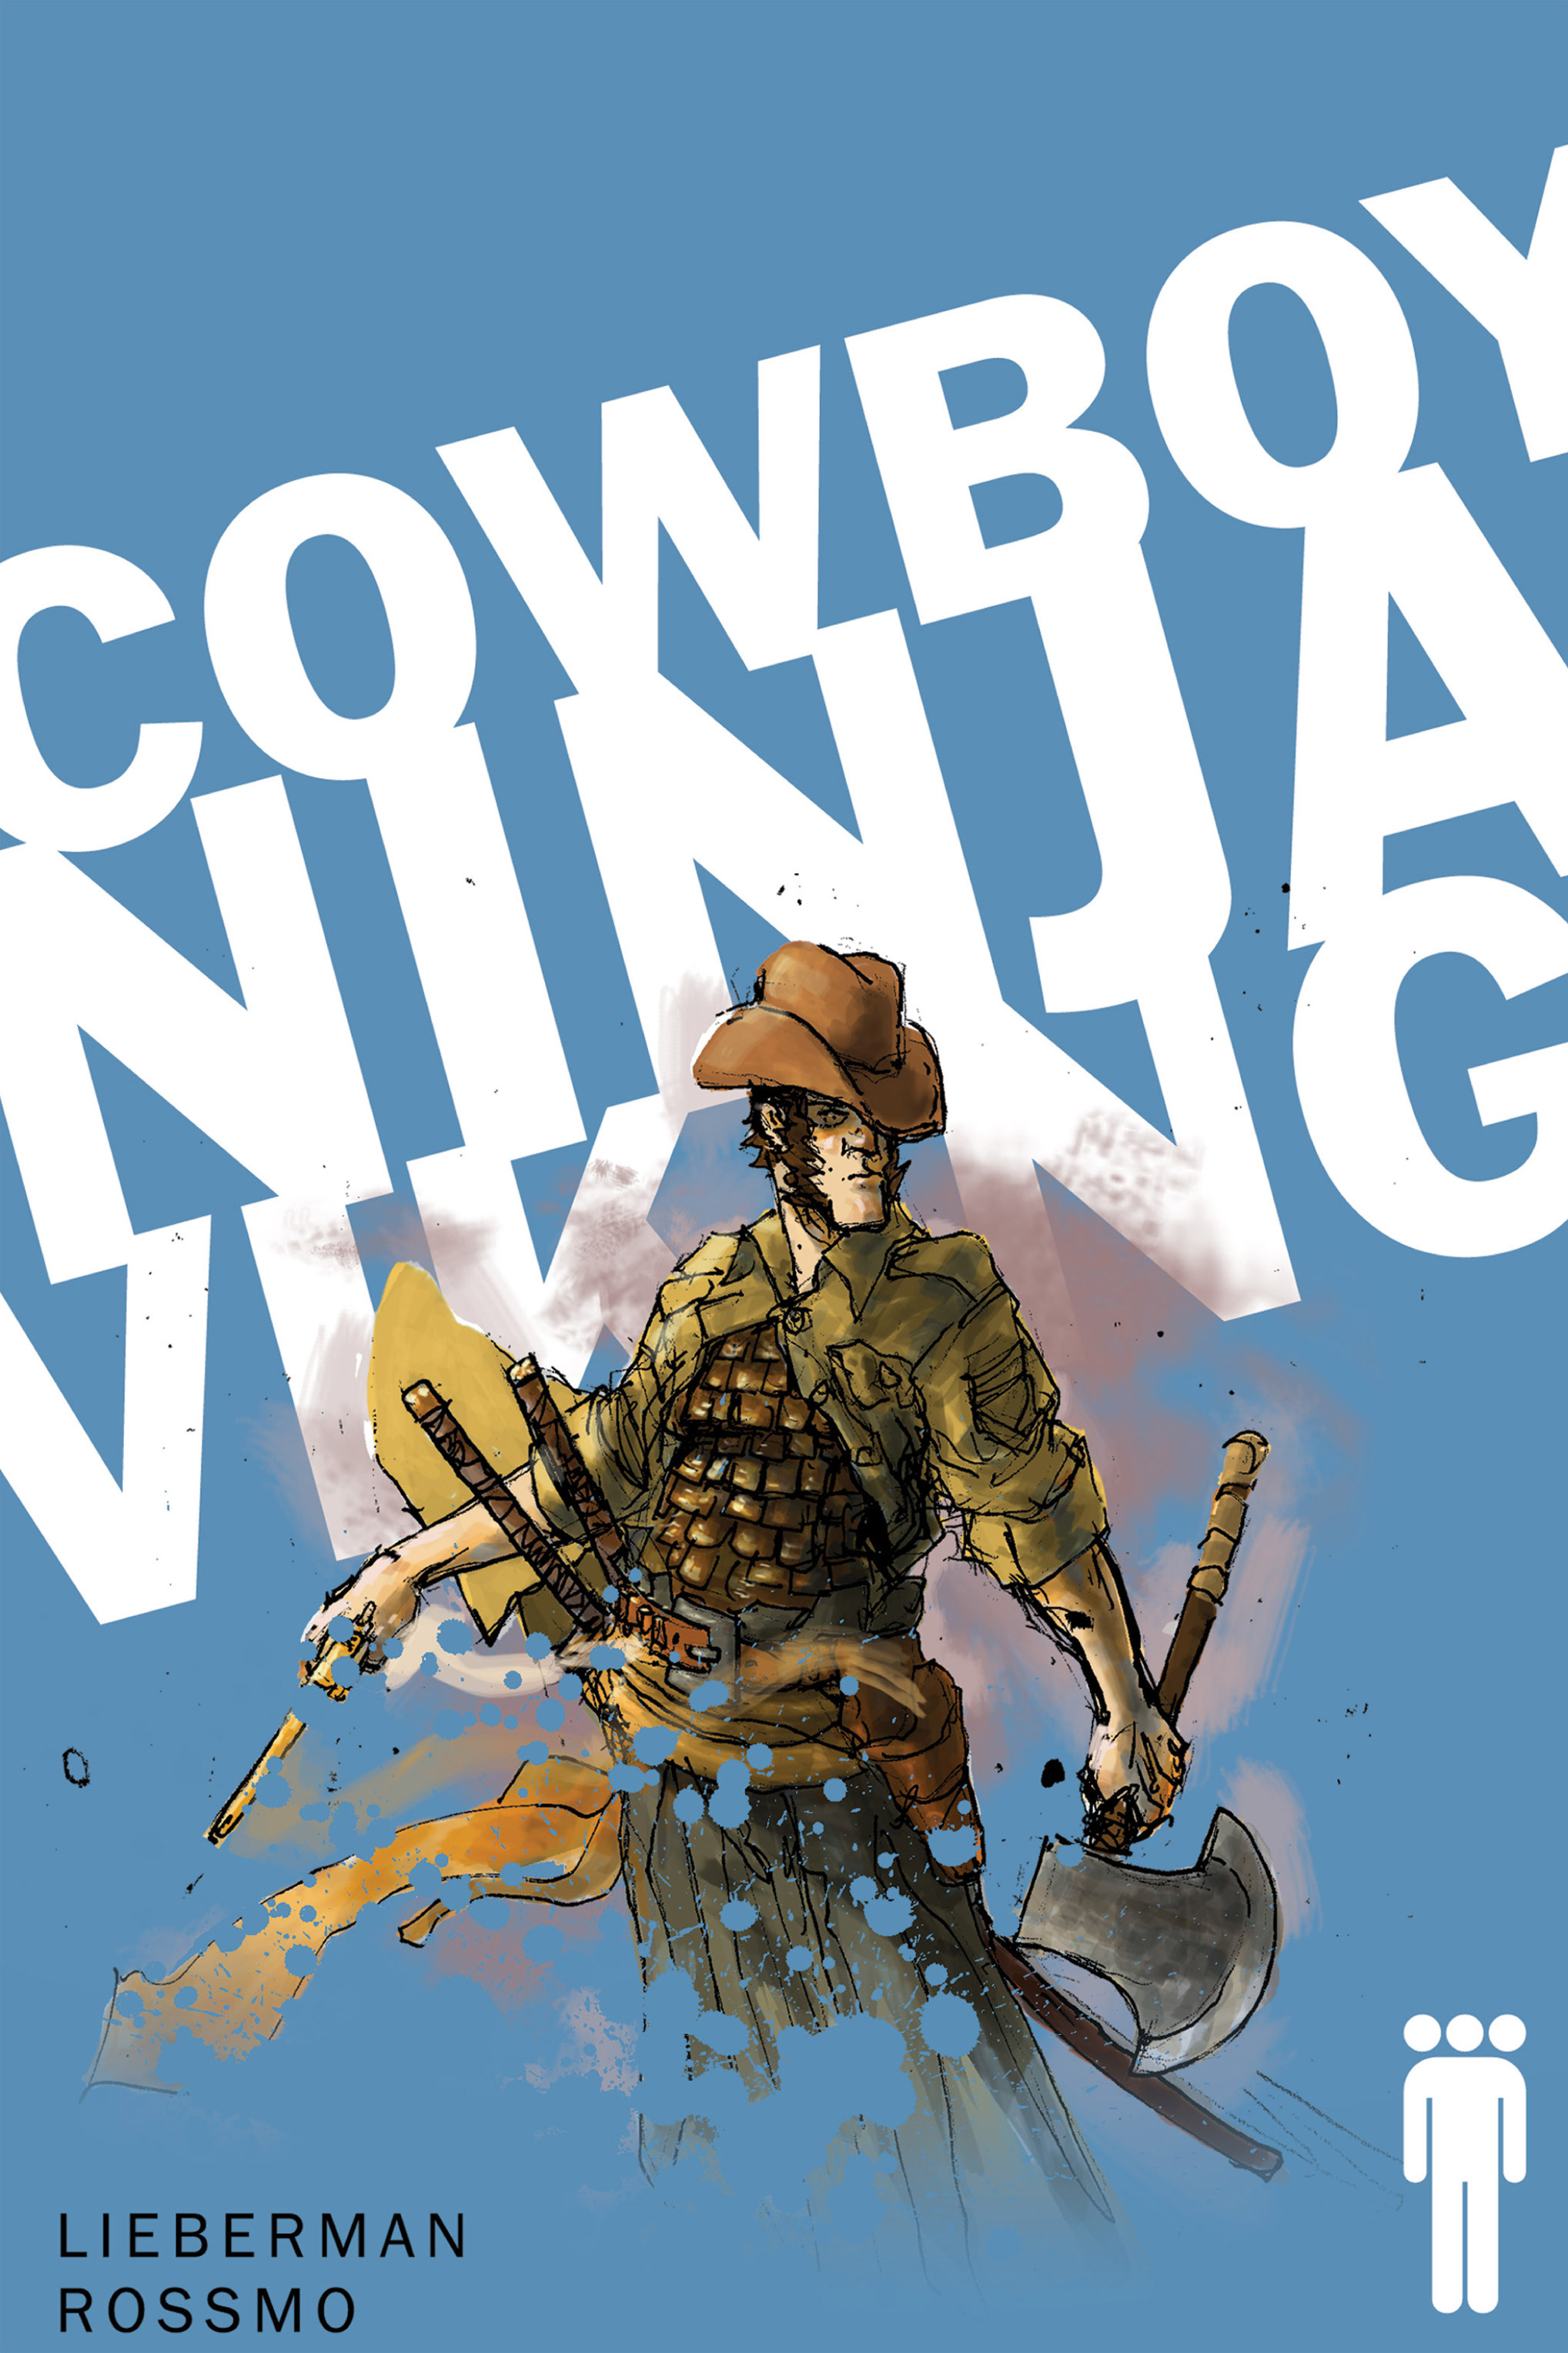 Read online Cowboy Ninja Viking Deluxe Edition comic -  Issue # TPB - 6